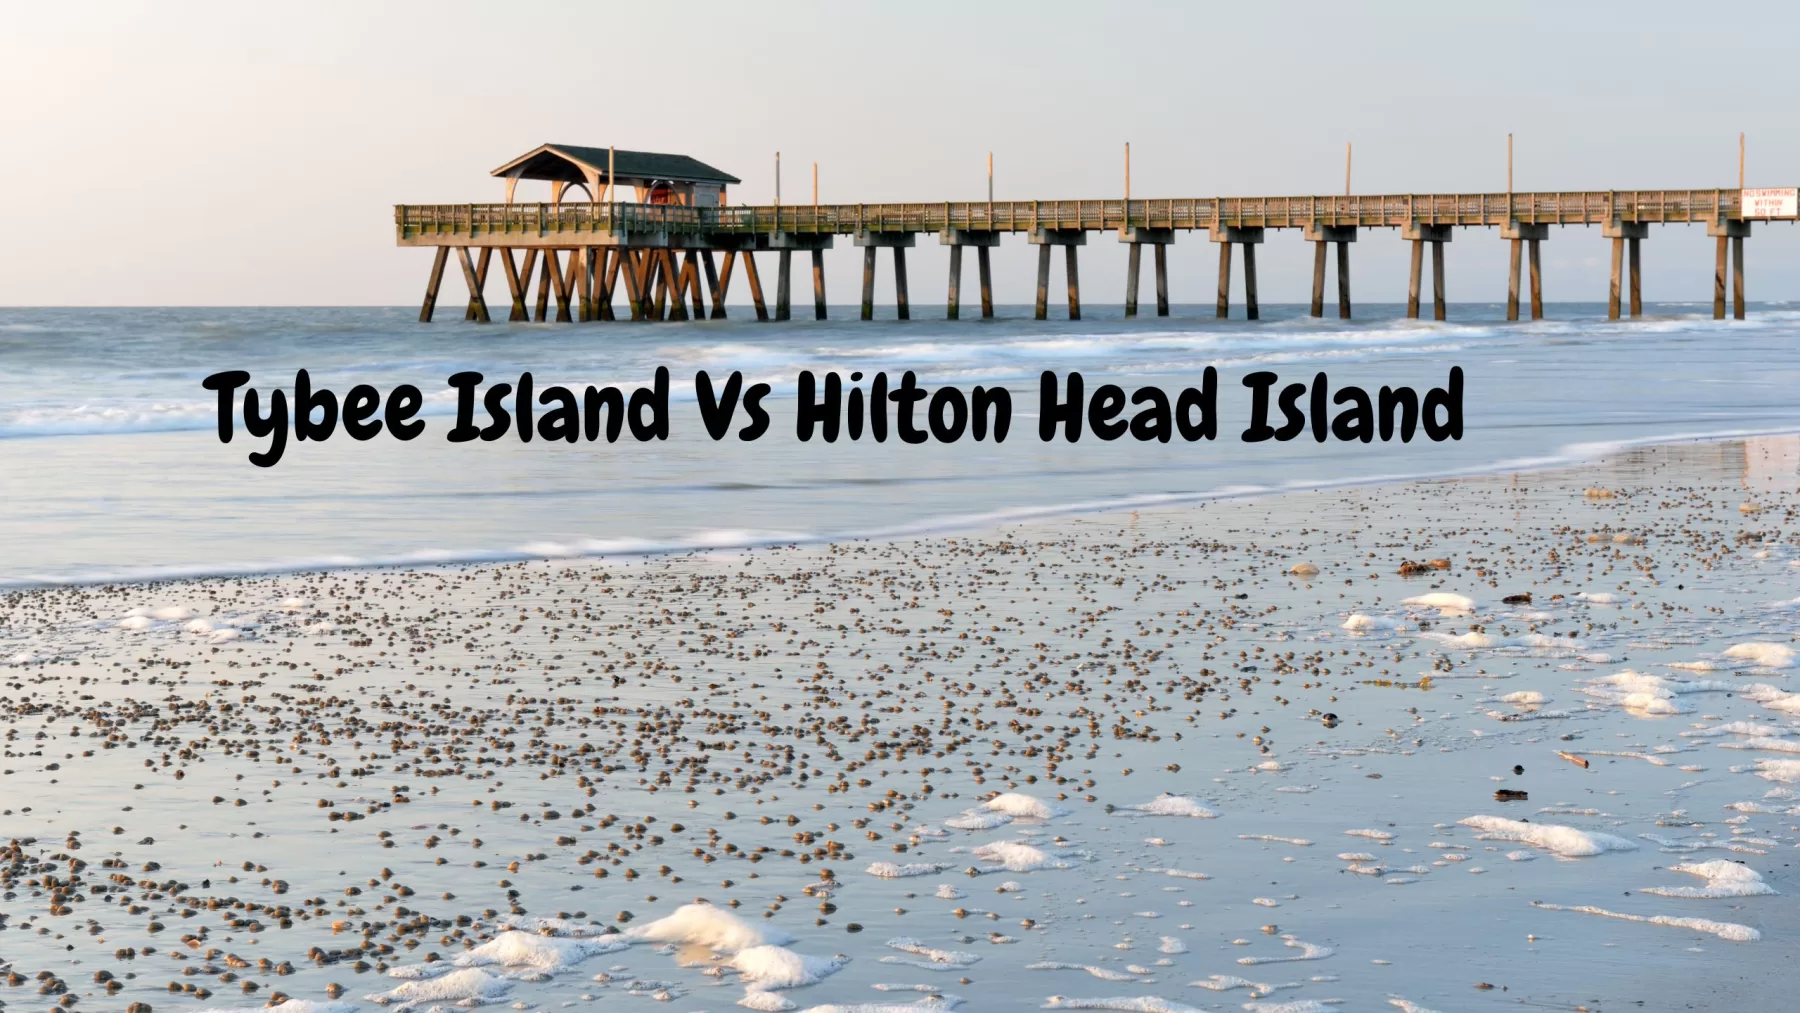 Image of The Tybee Island Pier and beach.  The beaches are covered in sea shells and the ocean water is calm.  Tybee Island Vs Hilton Head